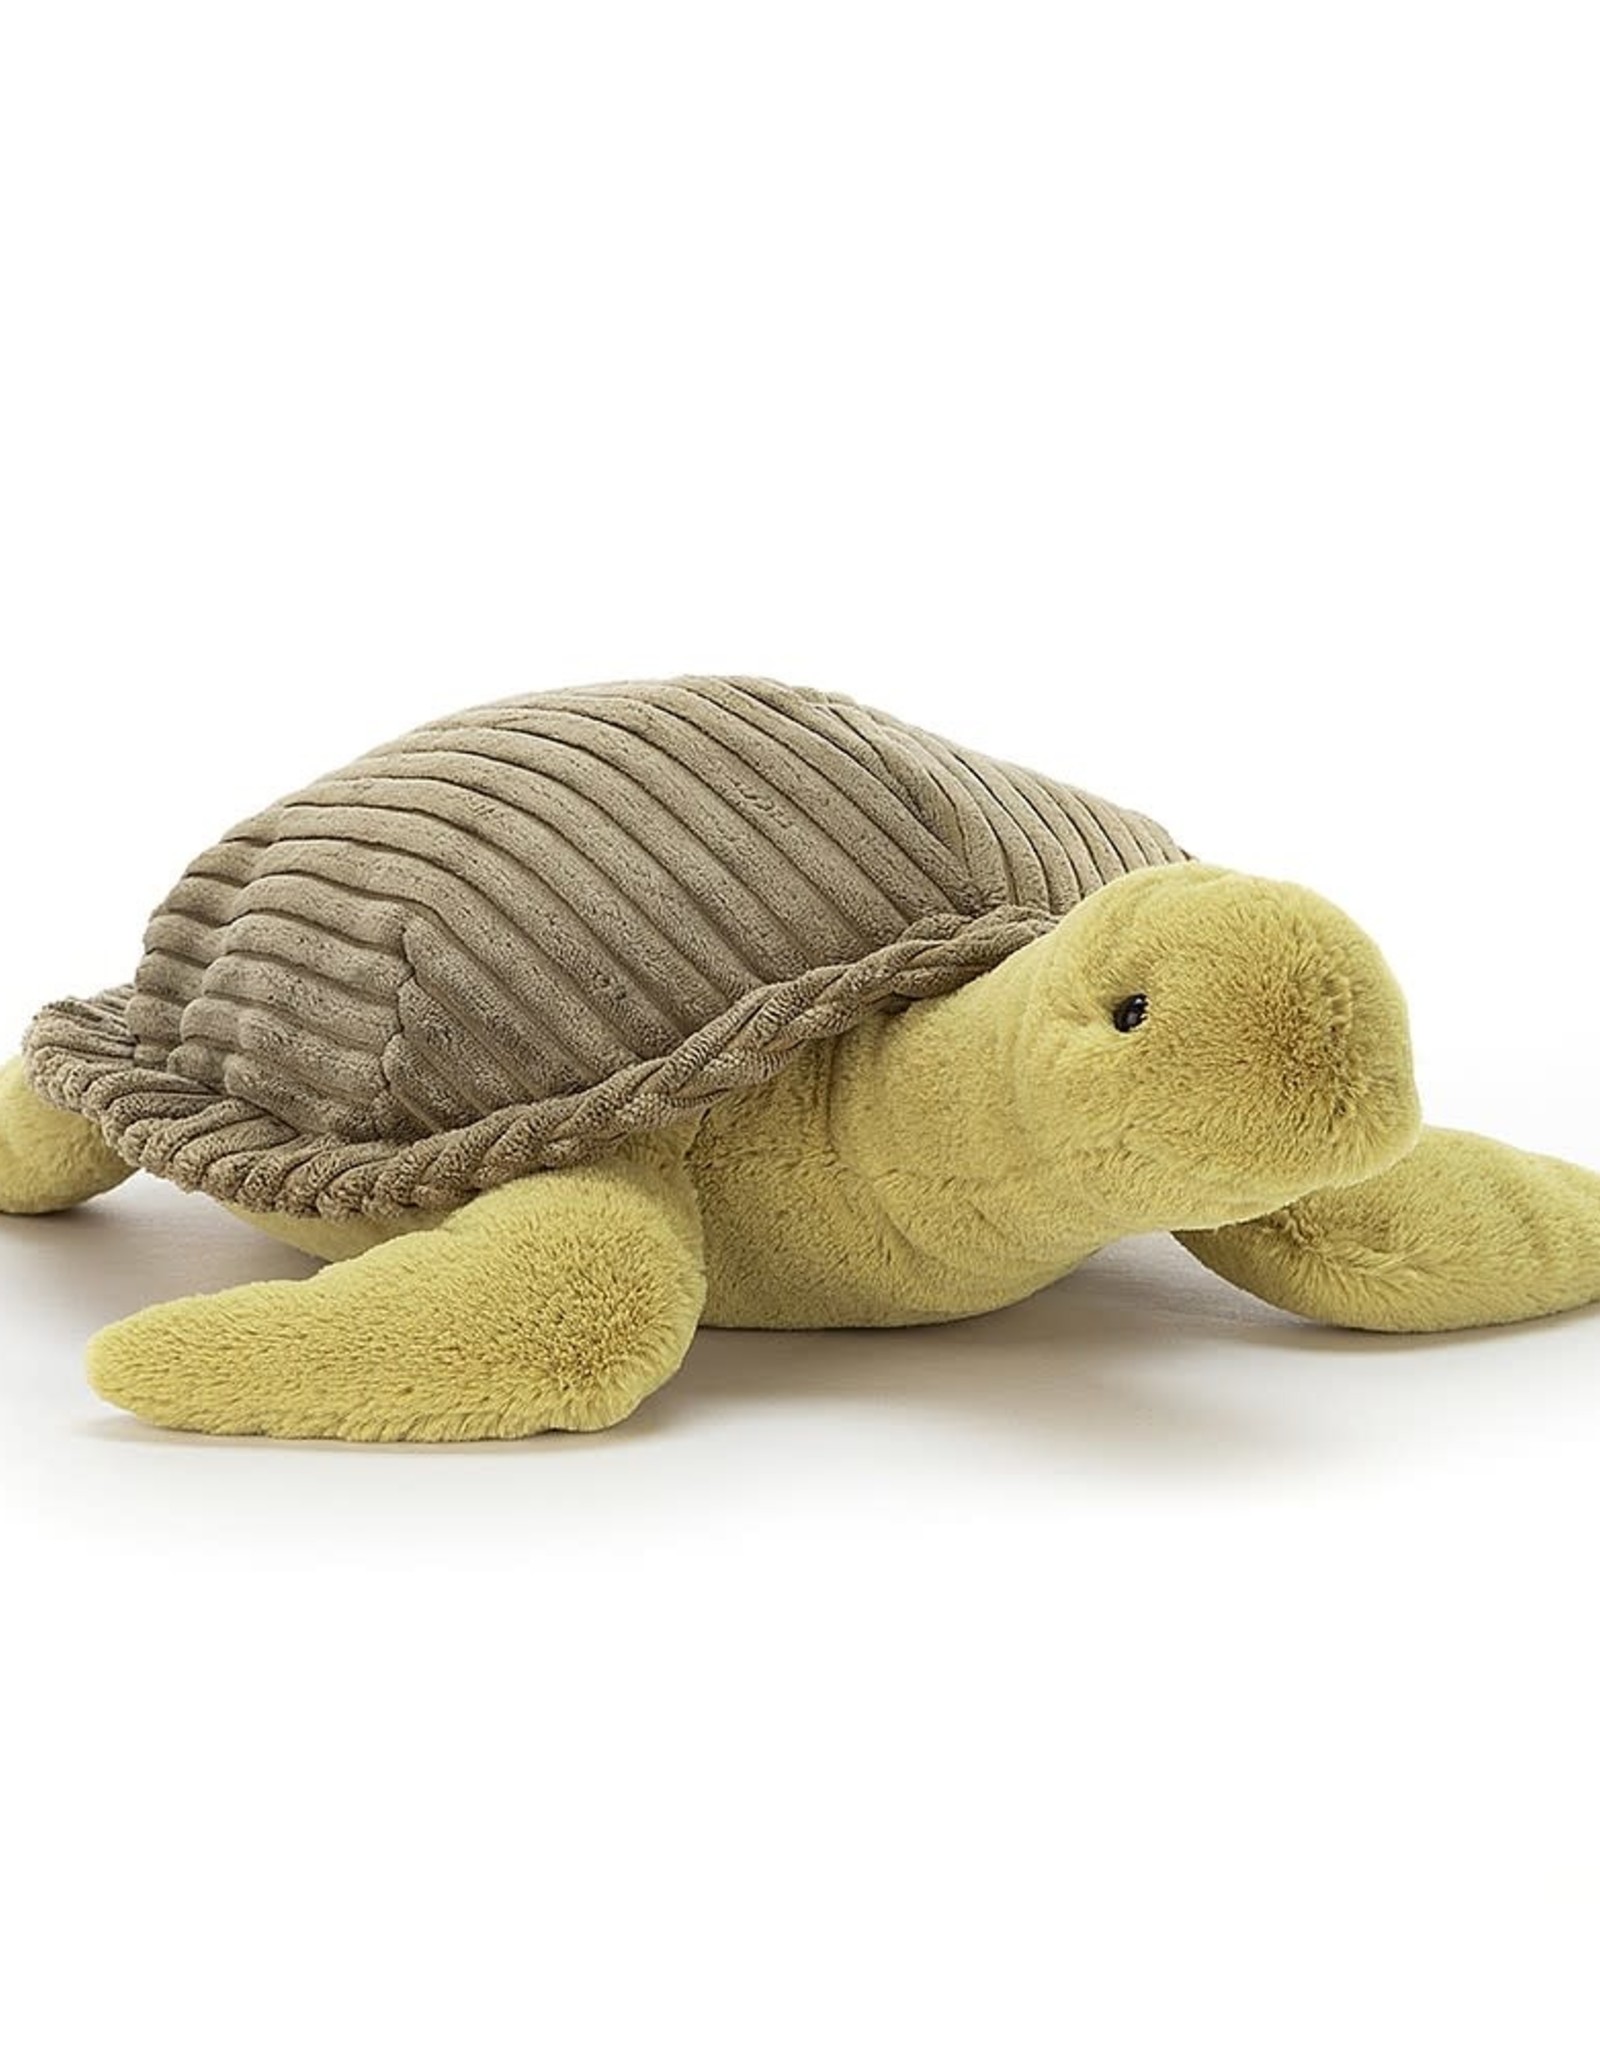 Jellycat Terence Turtle 17"